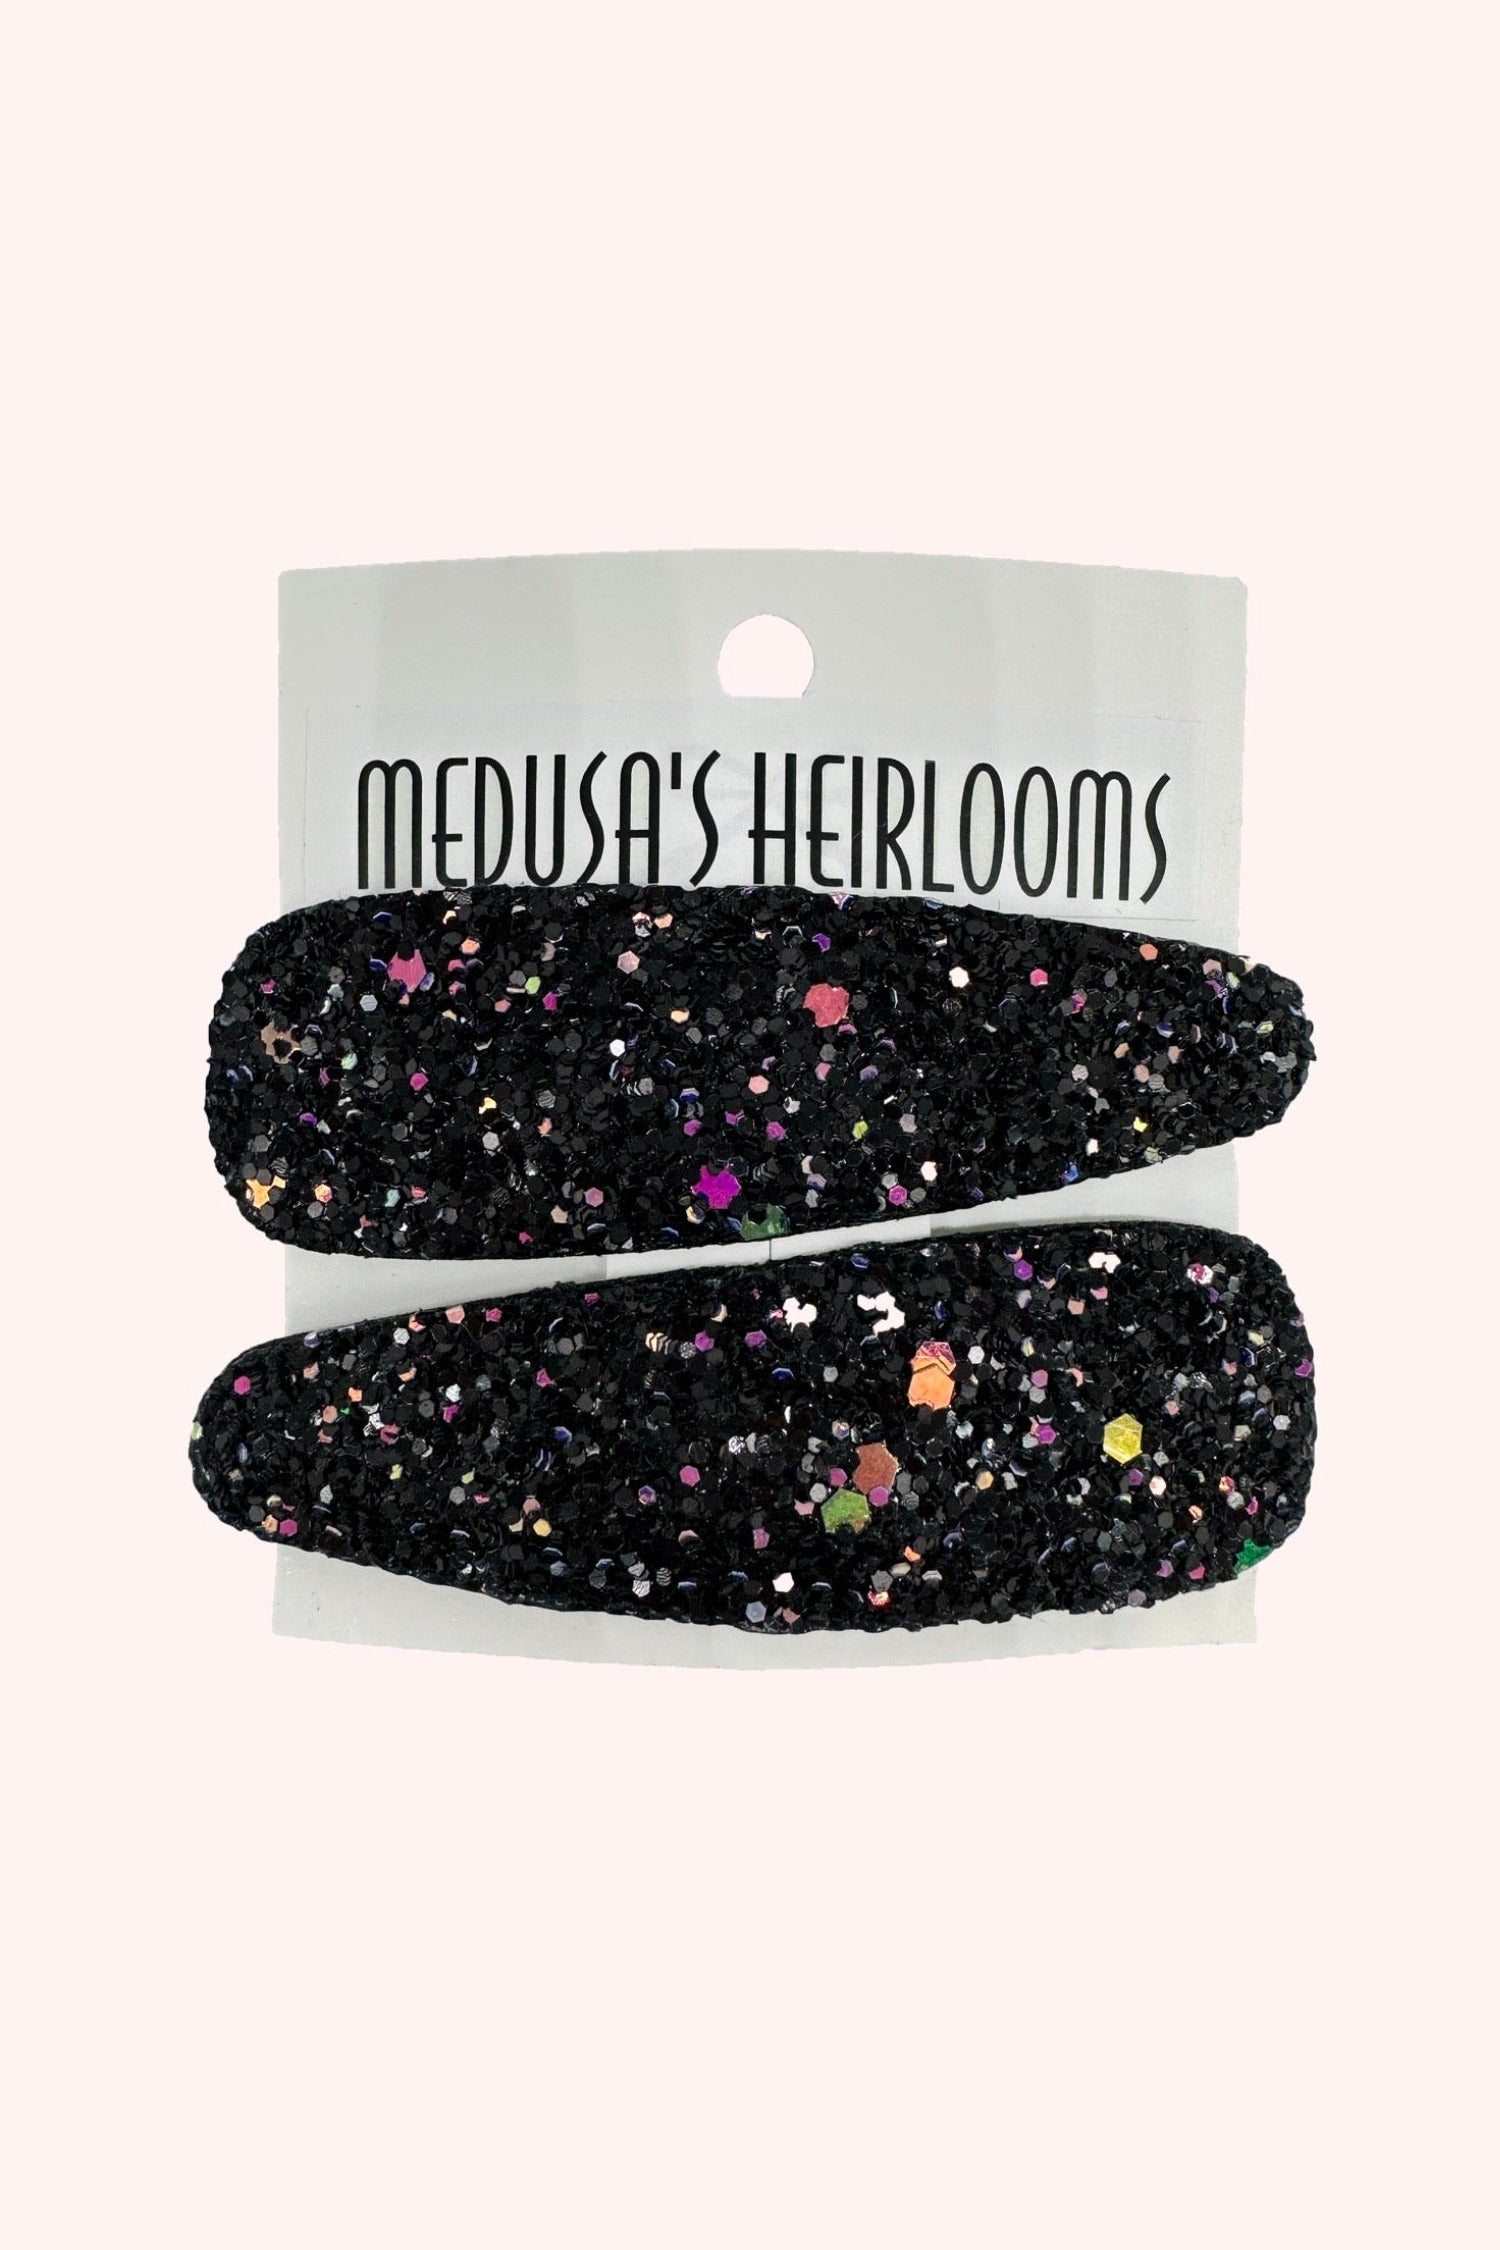 Glitter Snap Clip, pair of clip black with multicolored glitter on it, on “Medusa’s Heirlooms” display